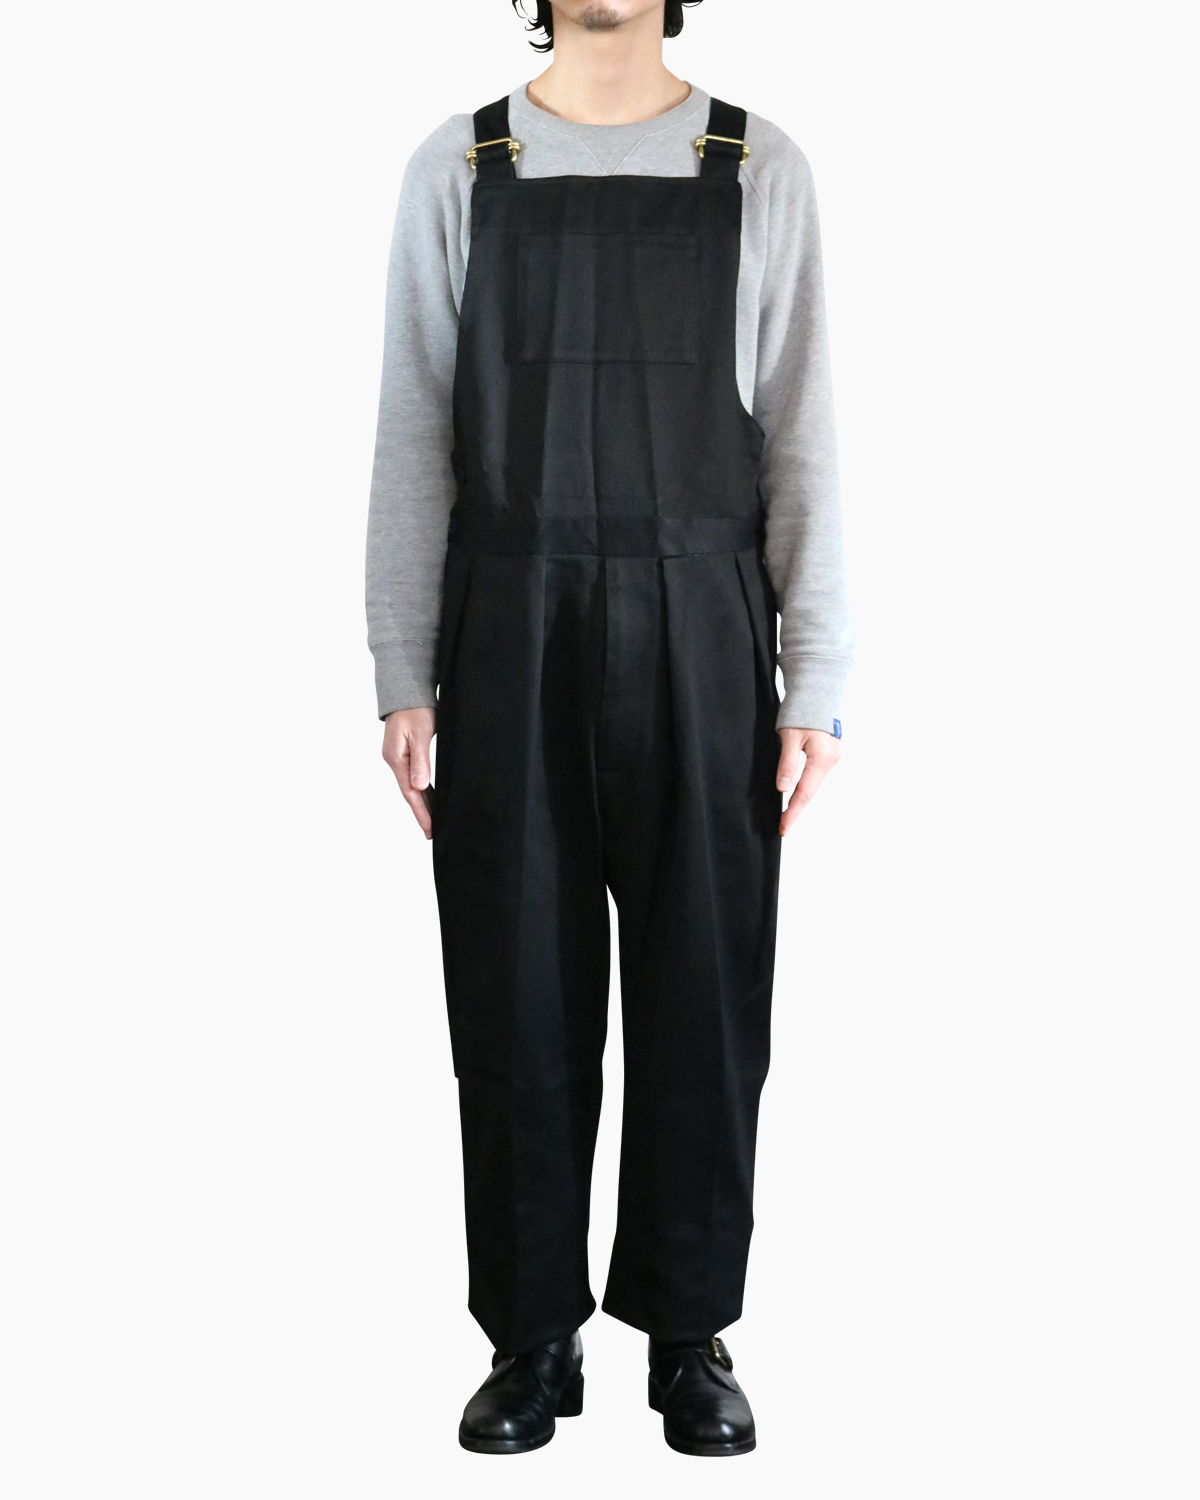 NEAT｜COTTON PIQUE｜OVERALL - Black｜PRODUCT｜Continuer Inc ...